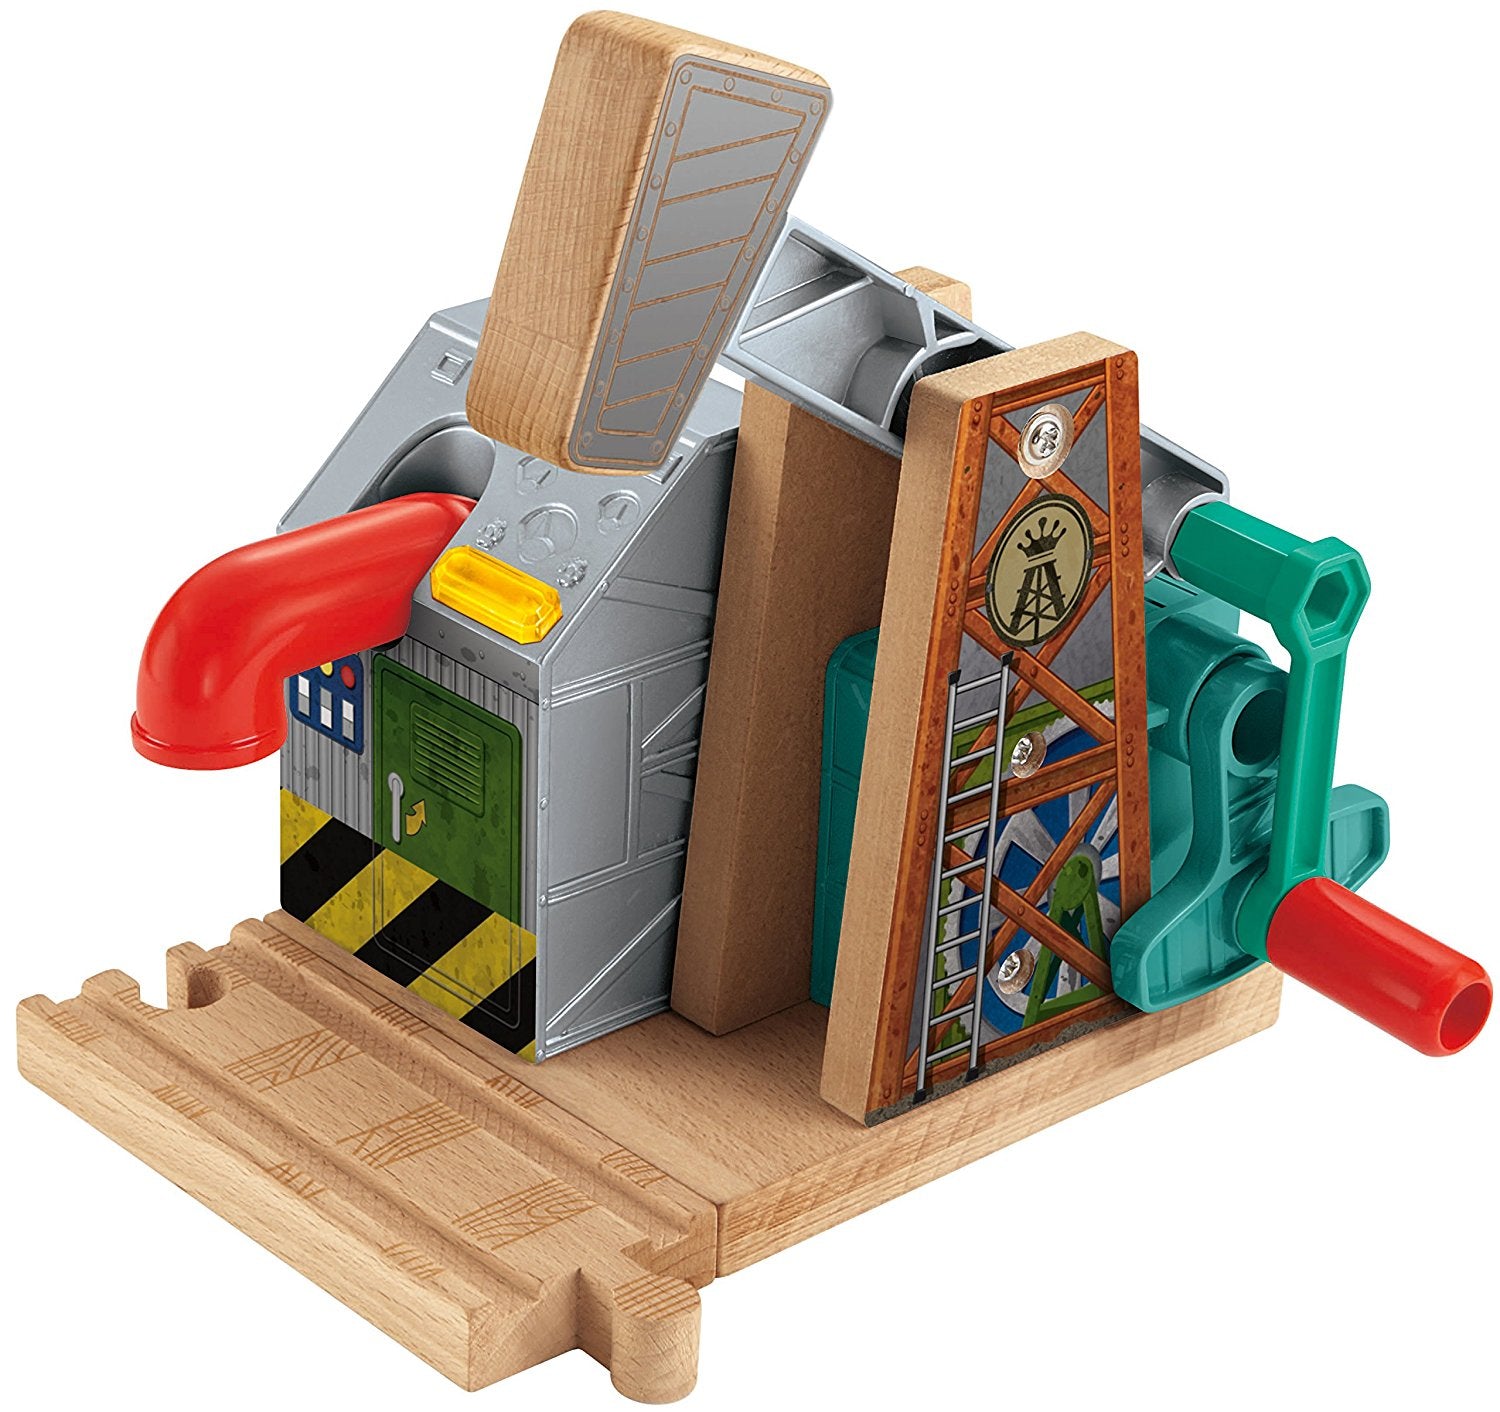 Fisher Price Thomas & Friends Wooden Railway, Sodor Oil Derrick - Battery Operated CDK44